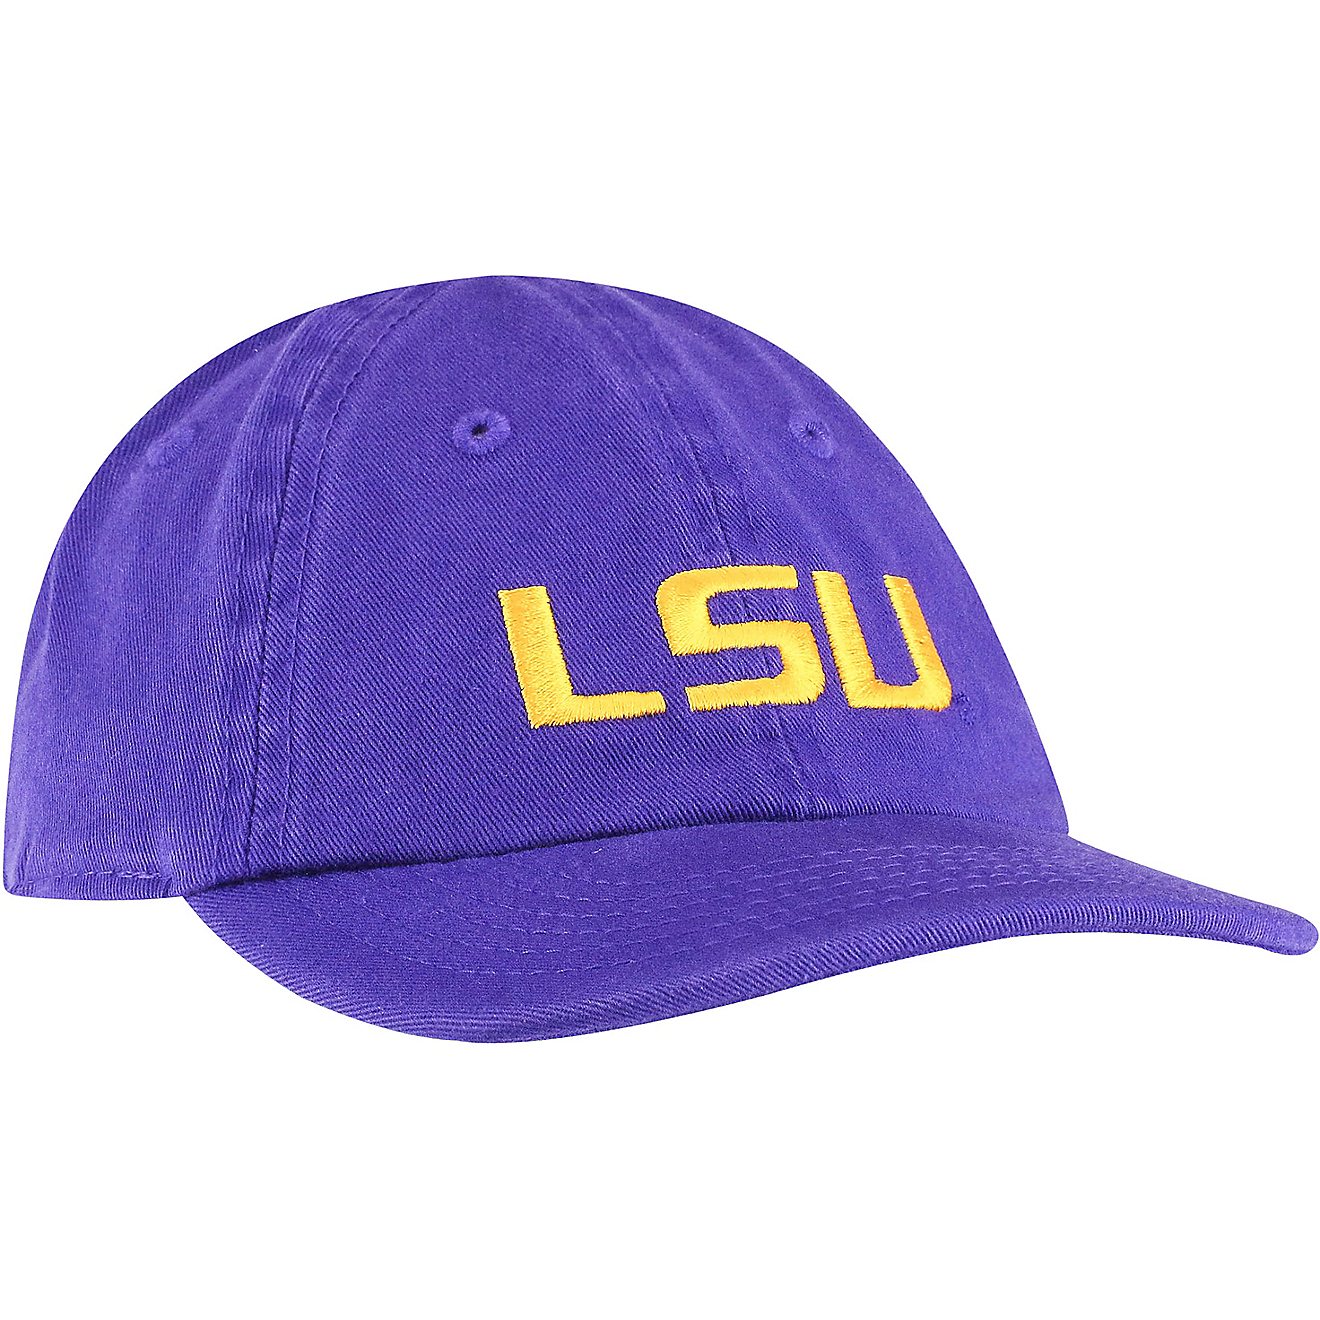 Top of the World Infants' Louisiana State University Mini Me Adjustable Cap                                                      - view number 3